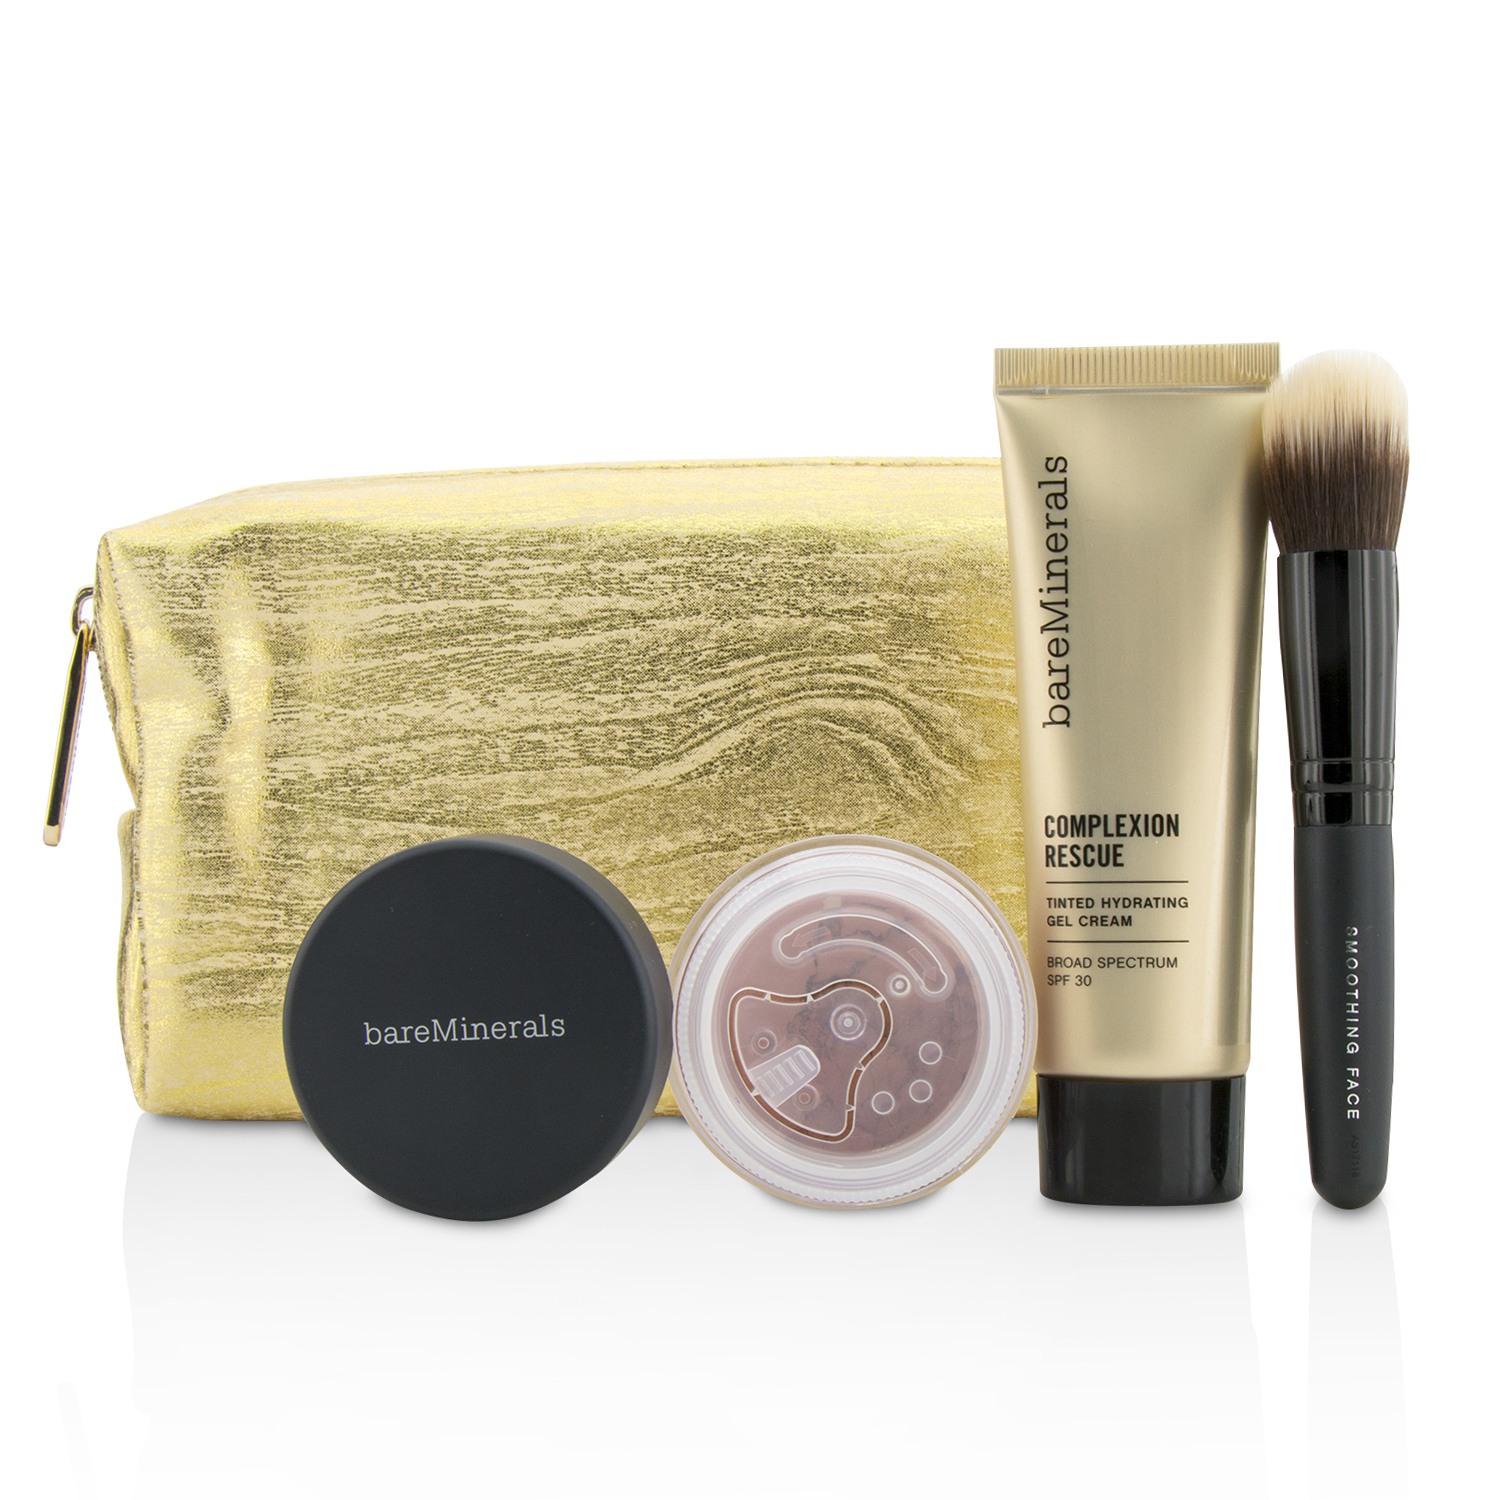 Take Me With You Complexion Rescue Try Me Set - # 03 Buttercream BareMinerals Image